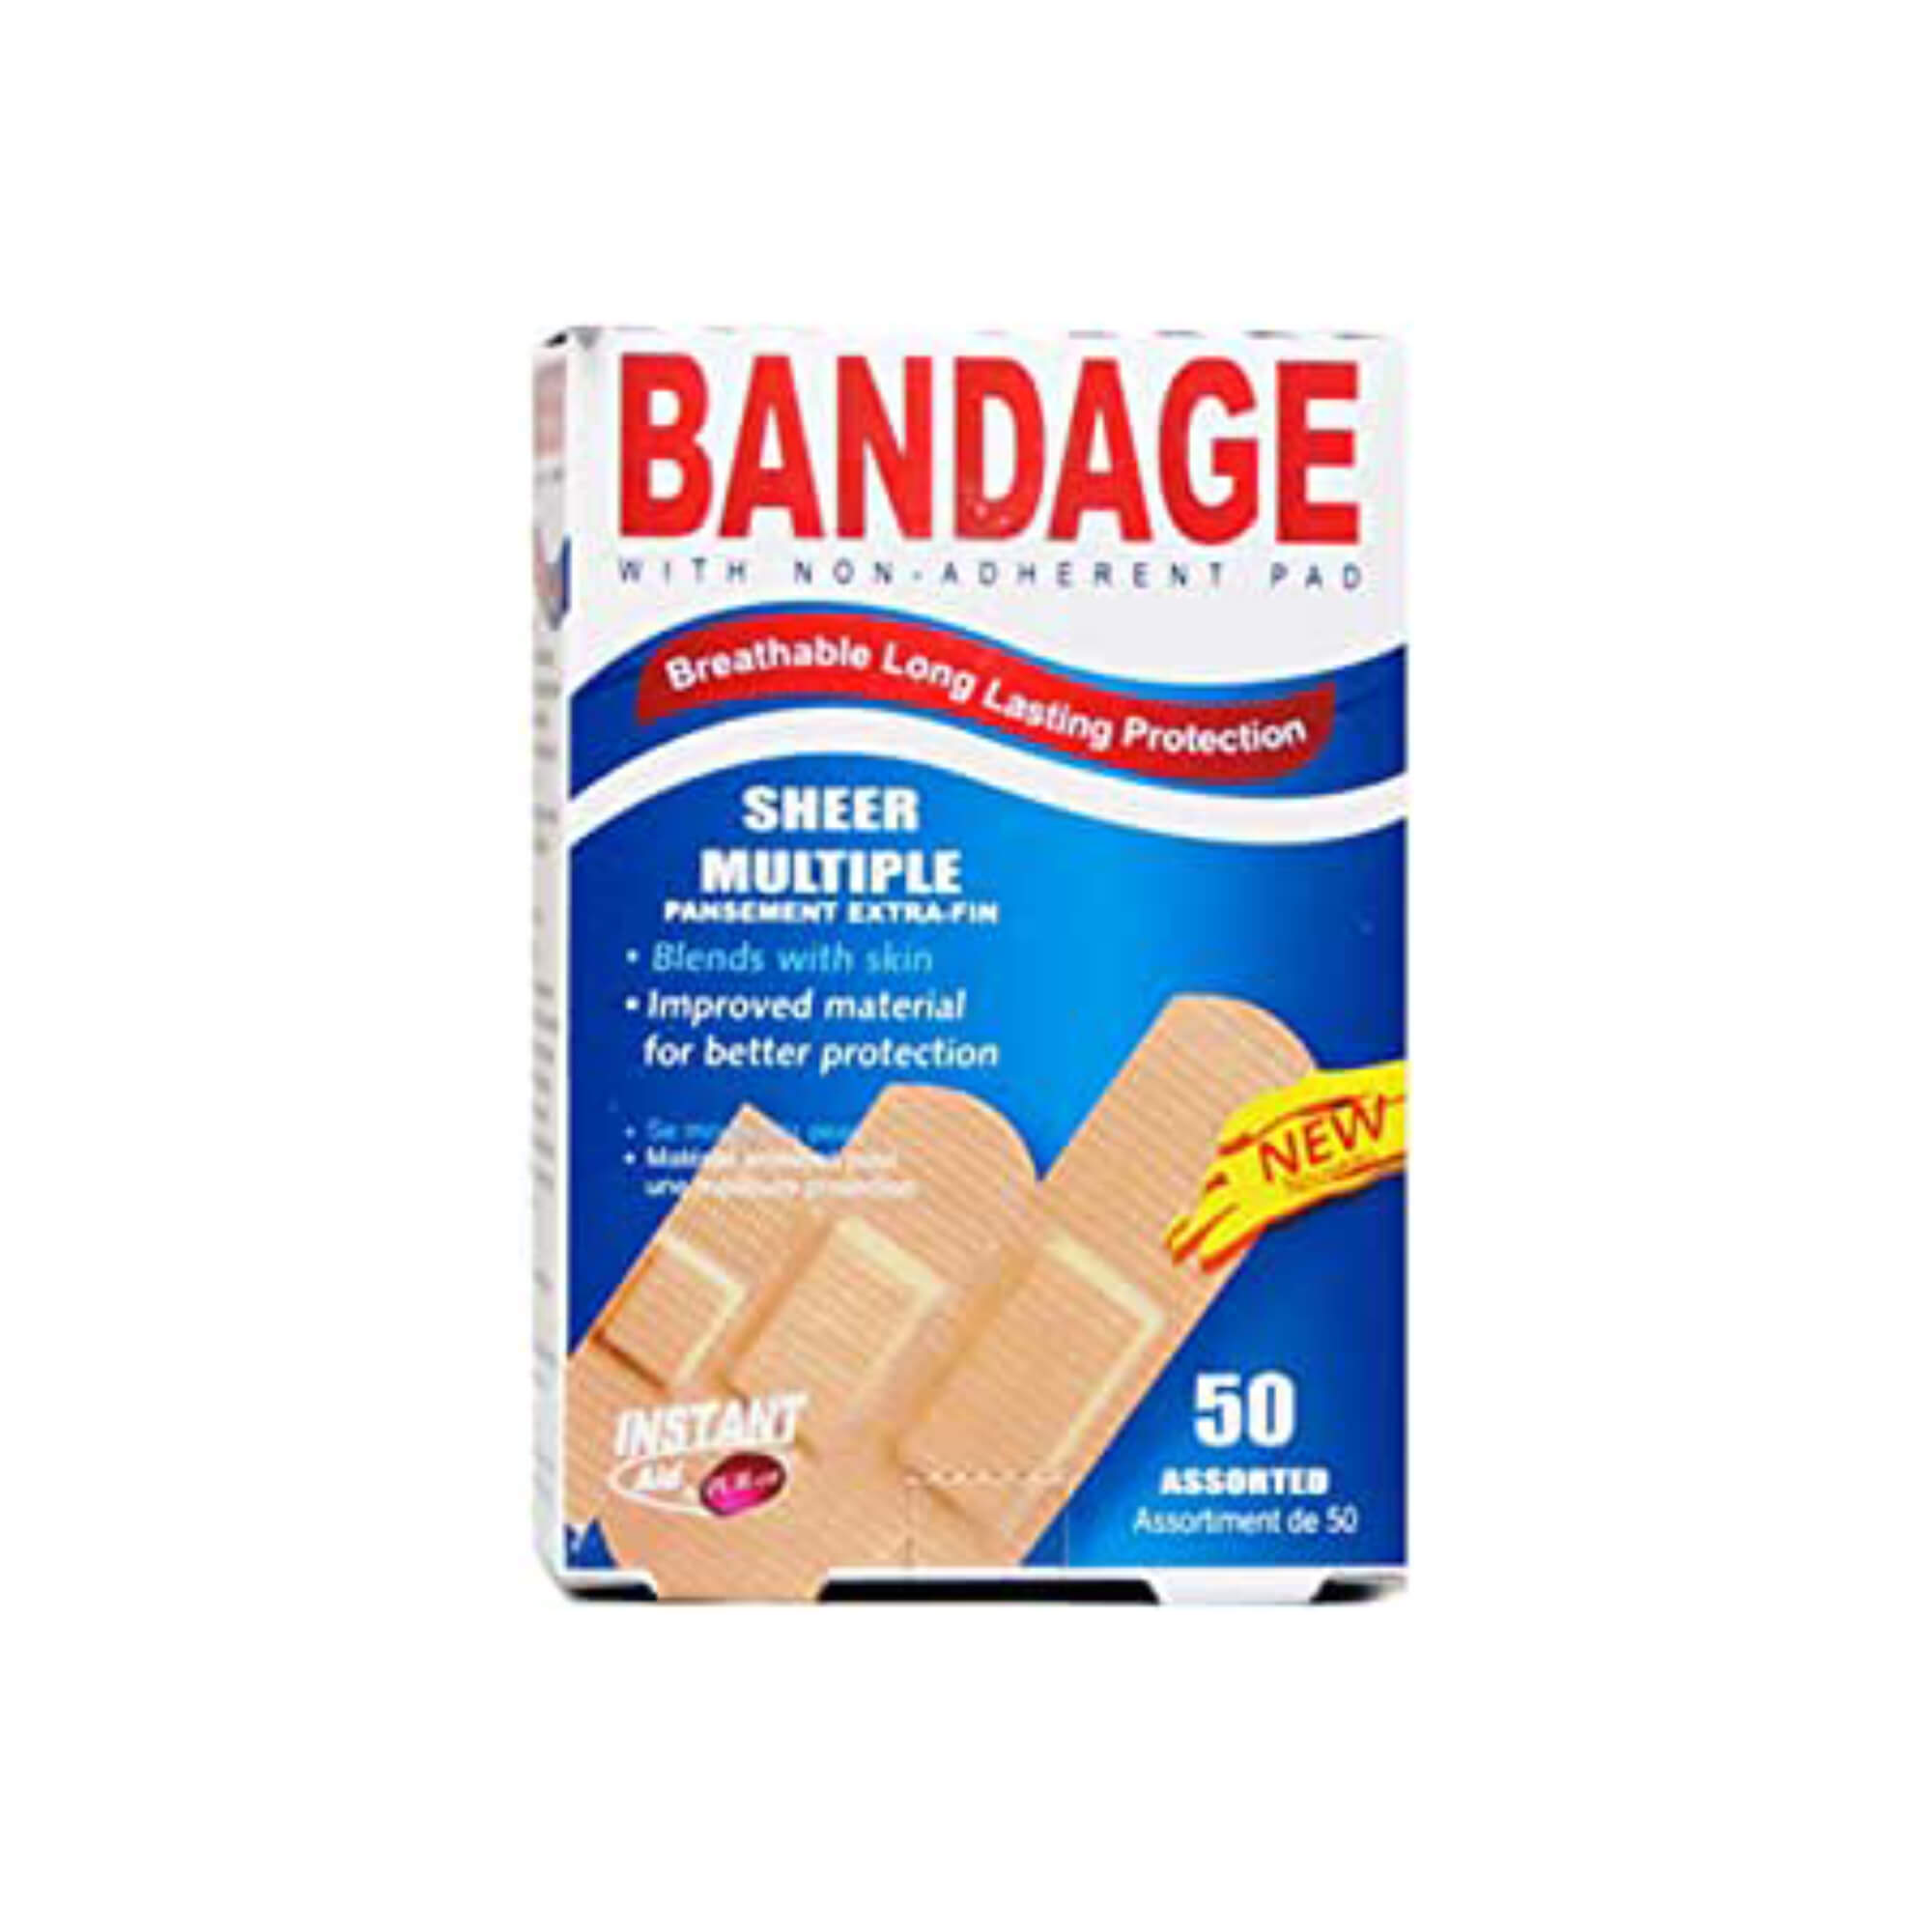 Instant Aid Sheer Multiple Bandage 50 In 1 Pack - Pack of 3